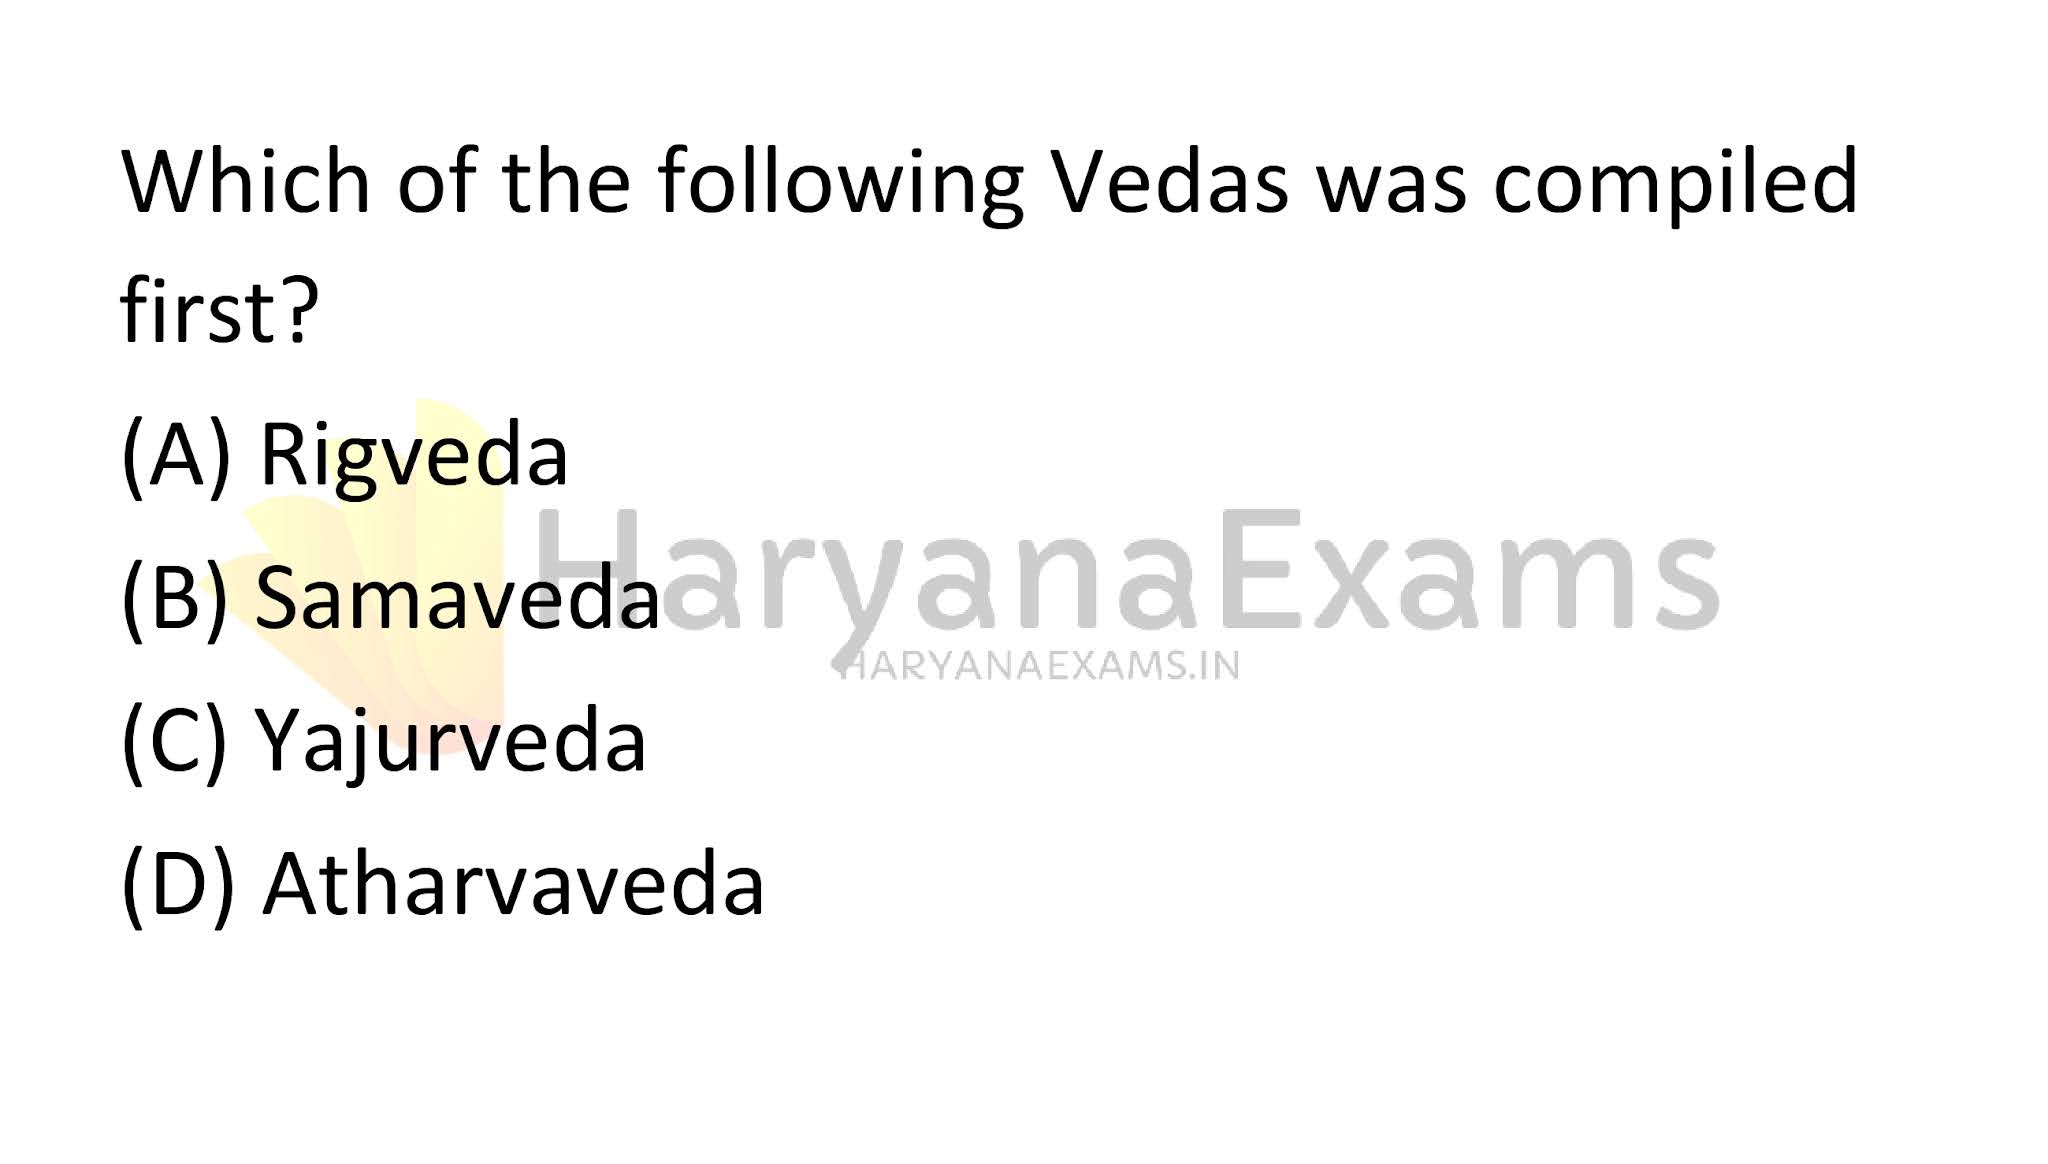 Which of the following Vedas was compiled first?